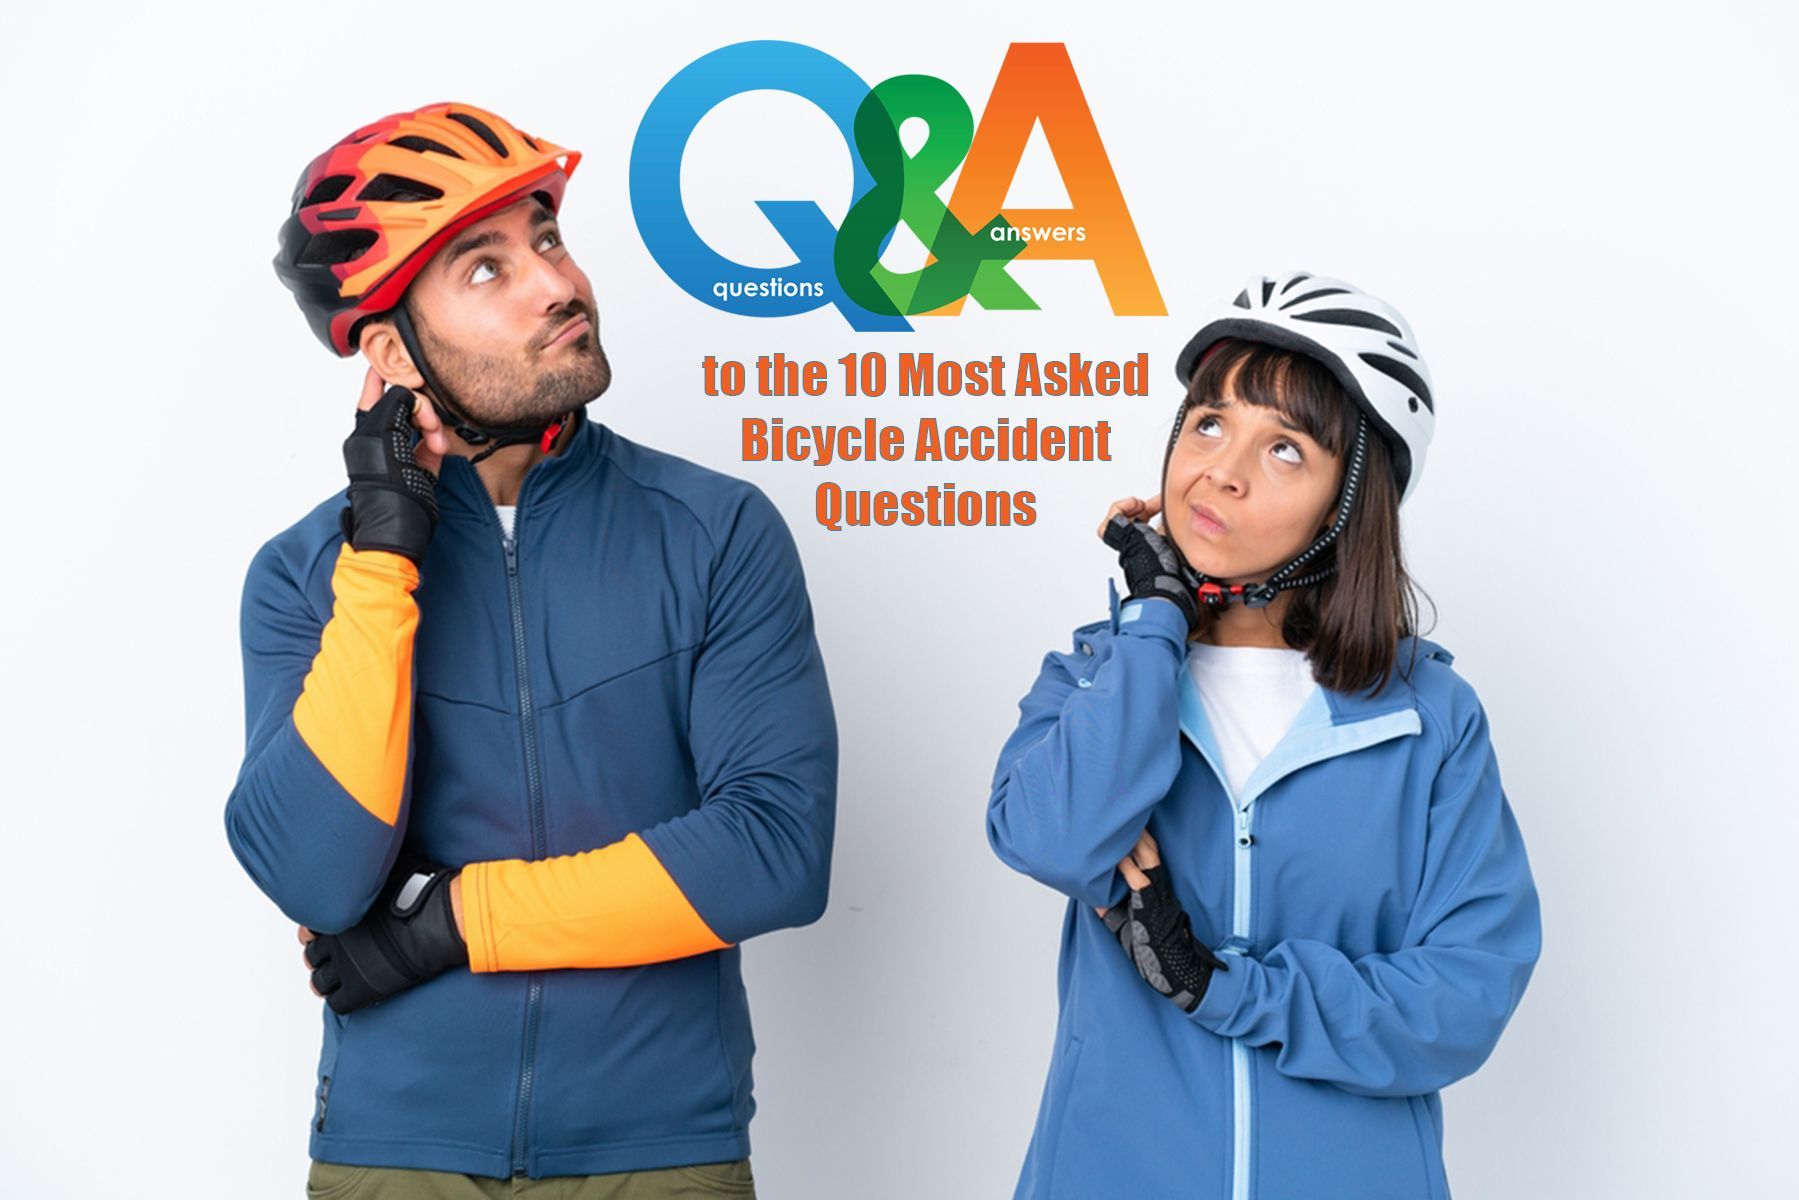 Confused cyclists looking for answers to bicycle accidents